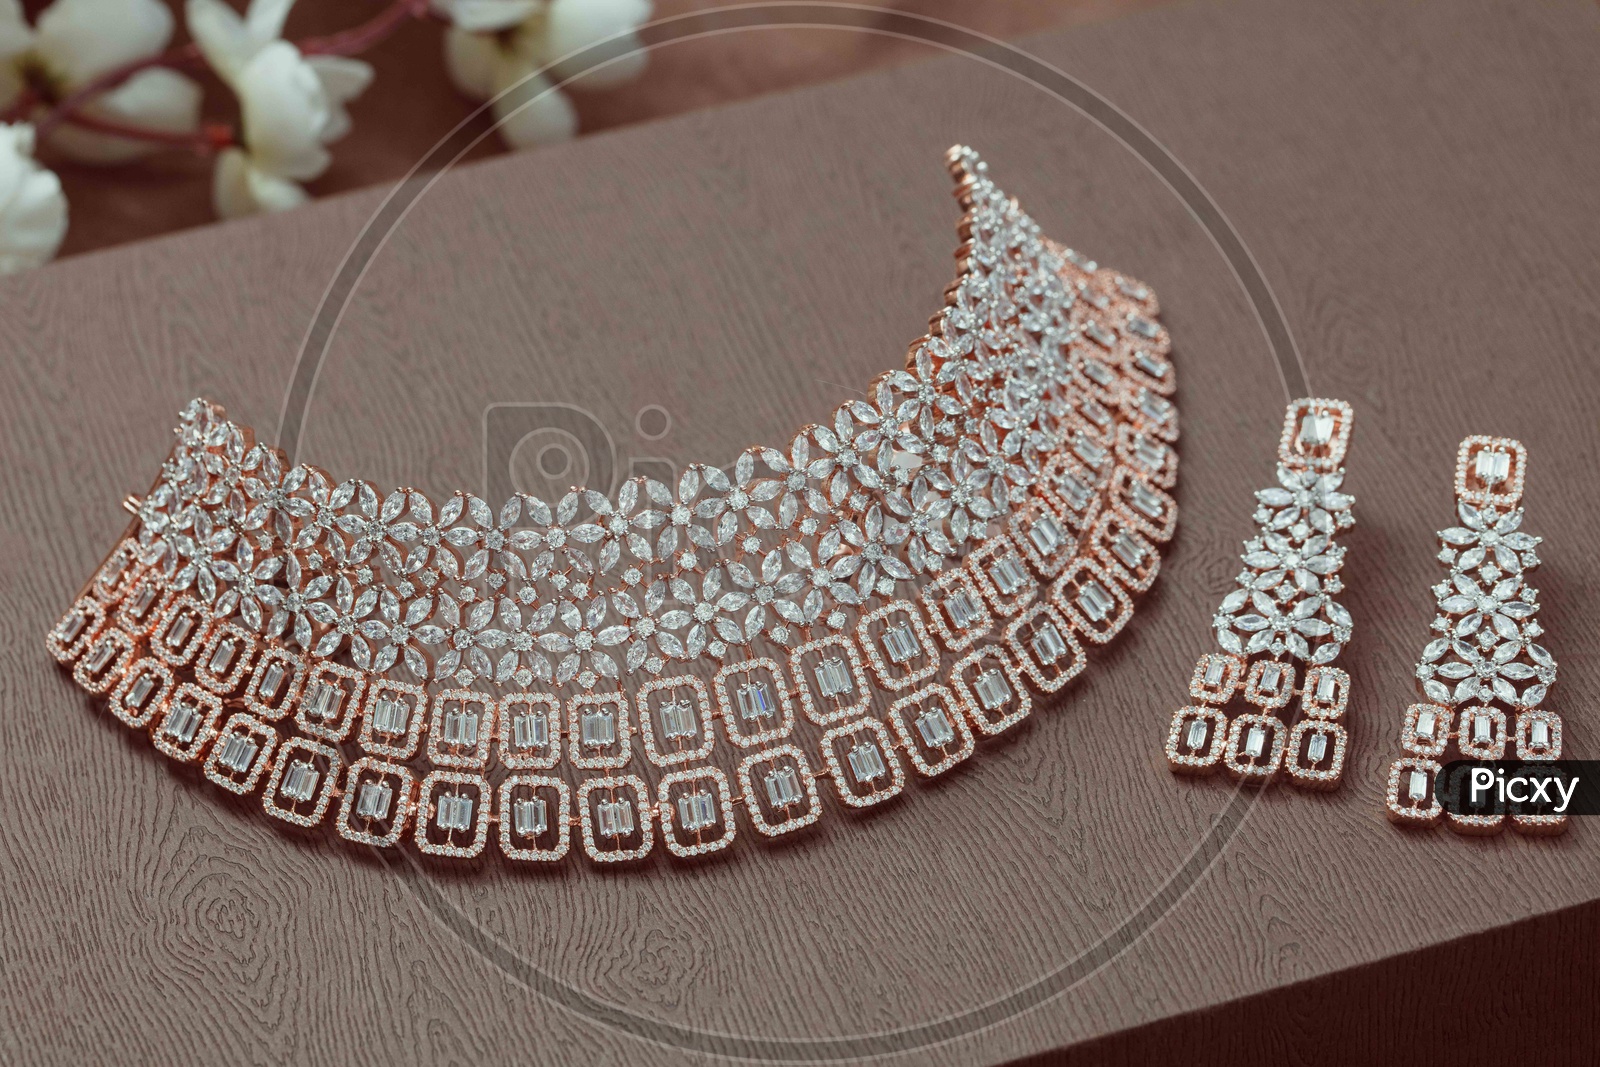 Diamond choker Necklace with earrings